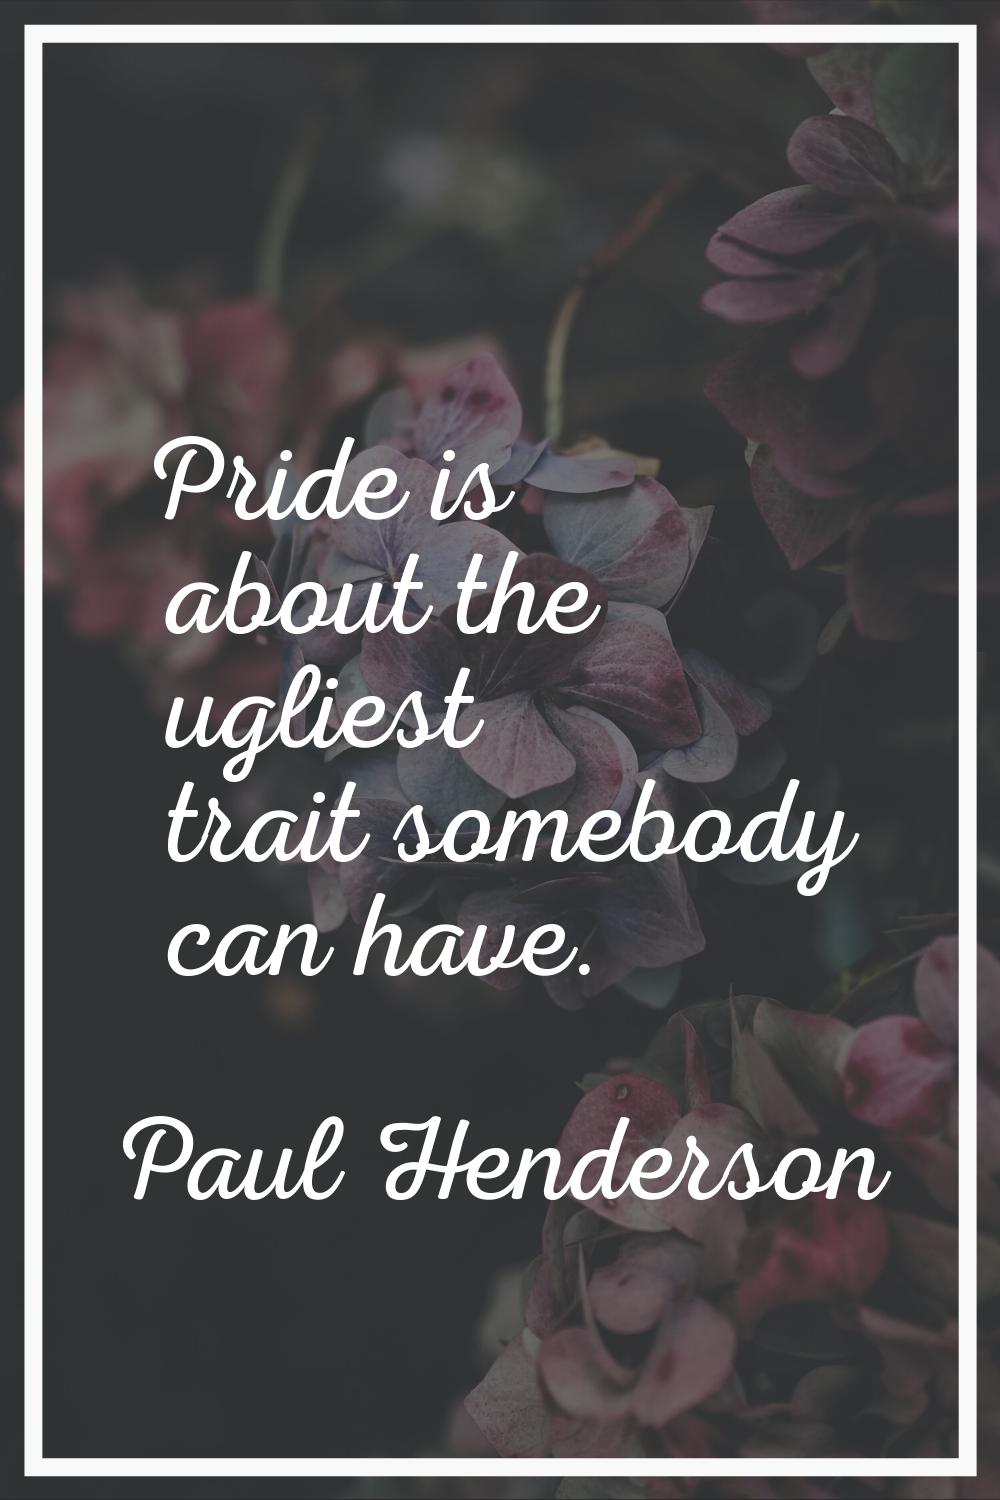 Pride is about the ugliest trait somebody can have.